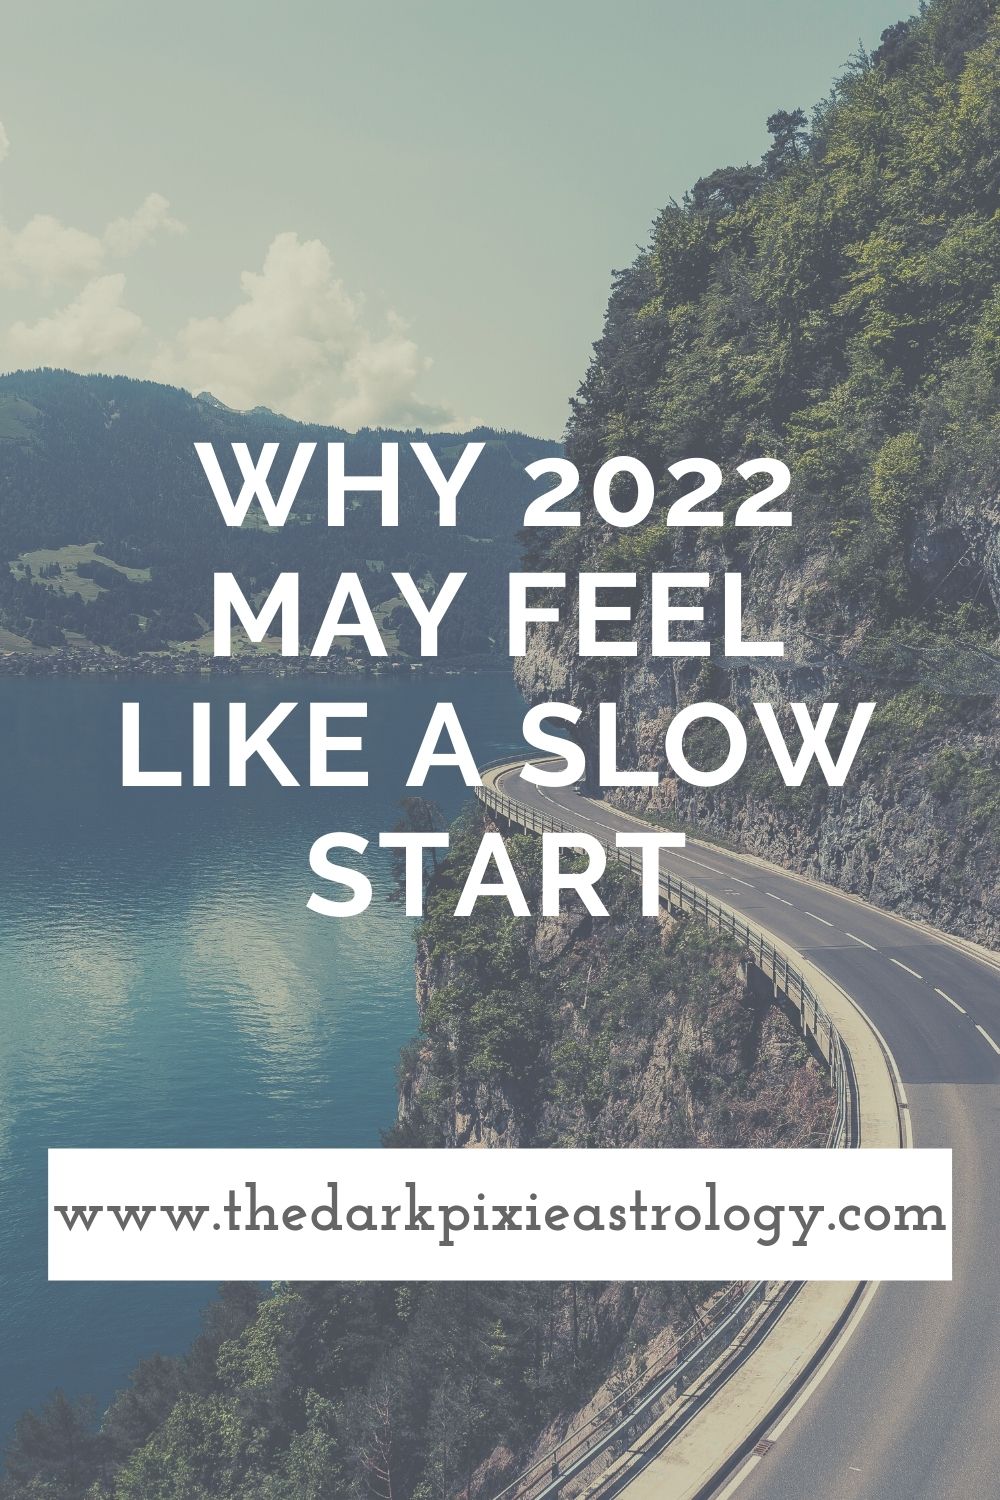 Why 2022 May Feel Like A Slow Start - The Dark Pixie Astrology